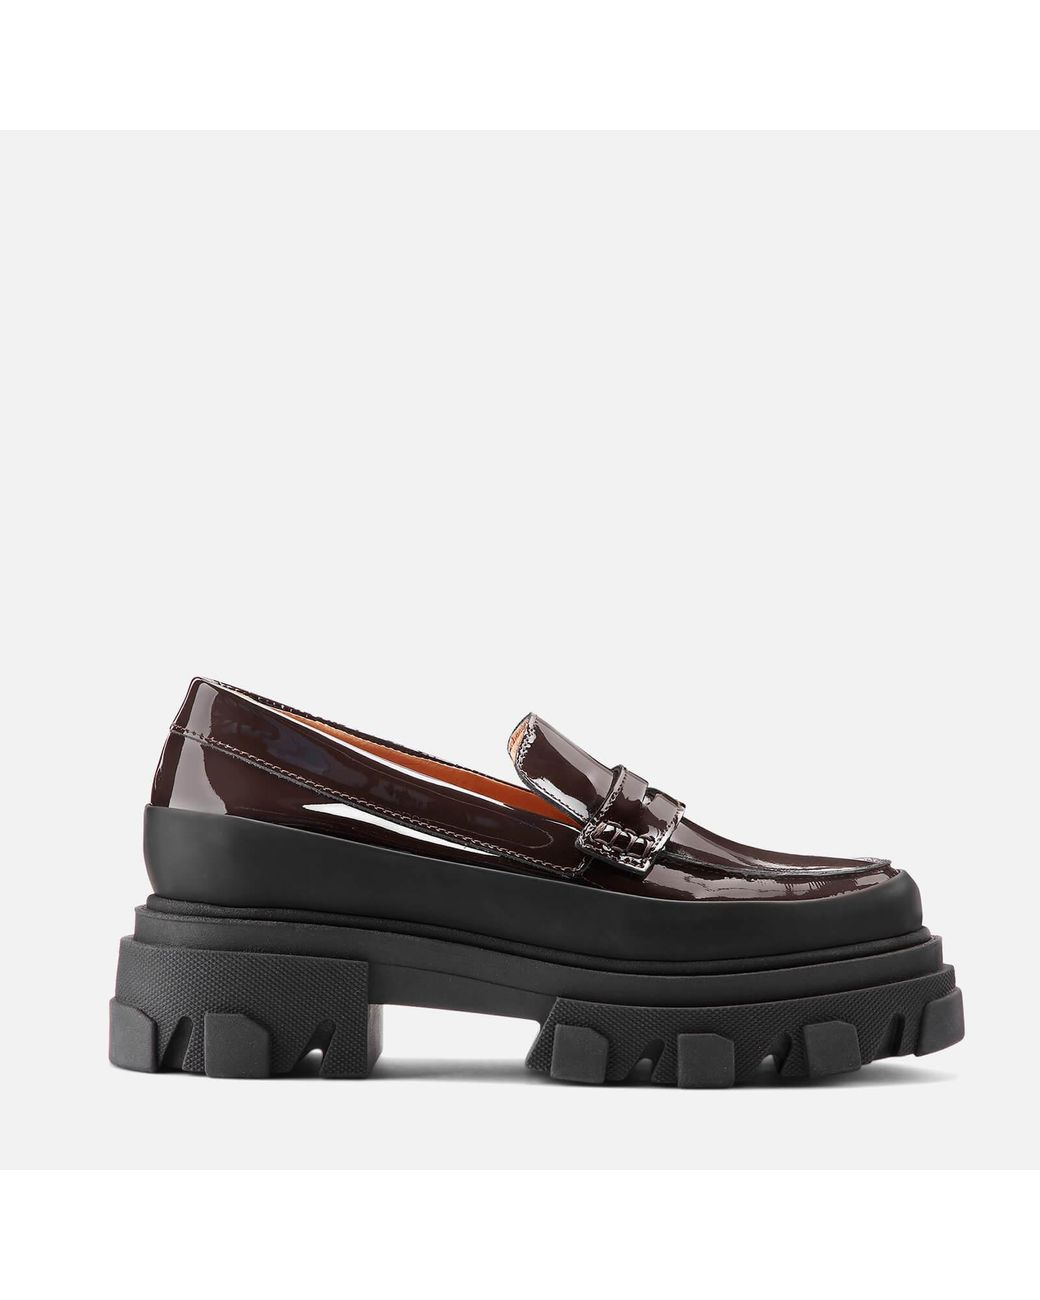 Ganni Patent Leather Loafers in Brown | Lyst